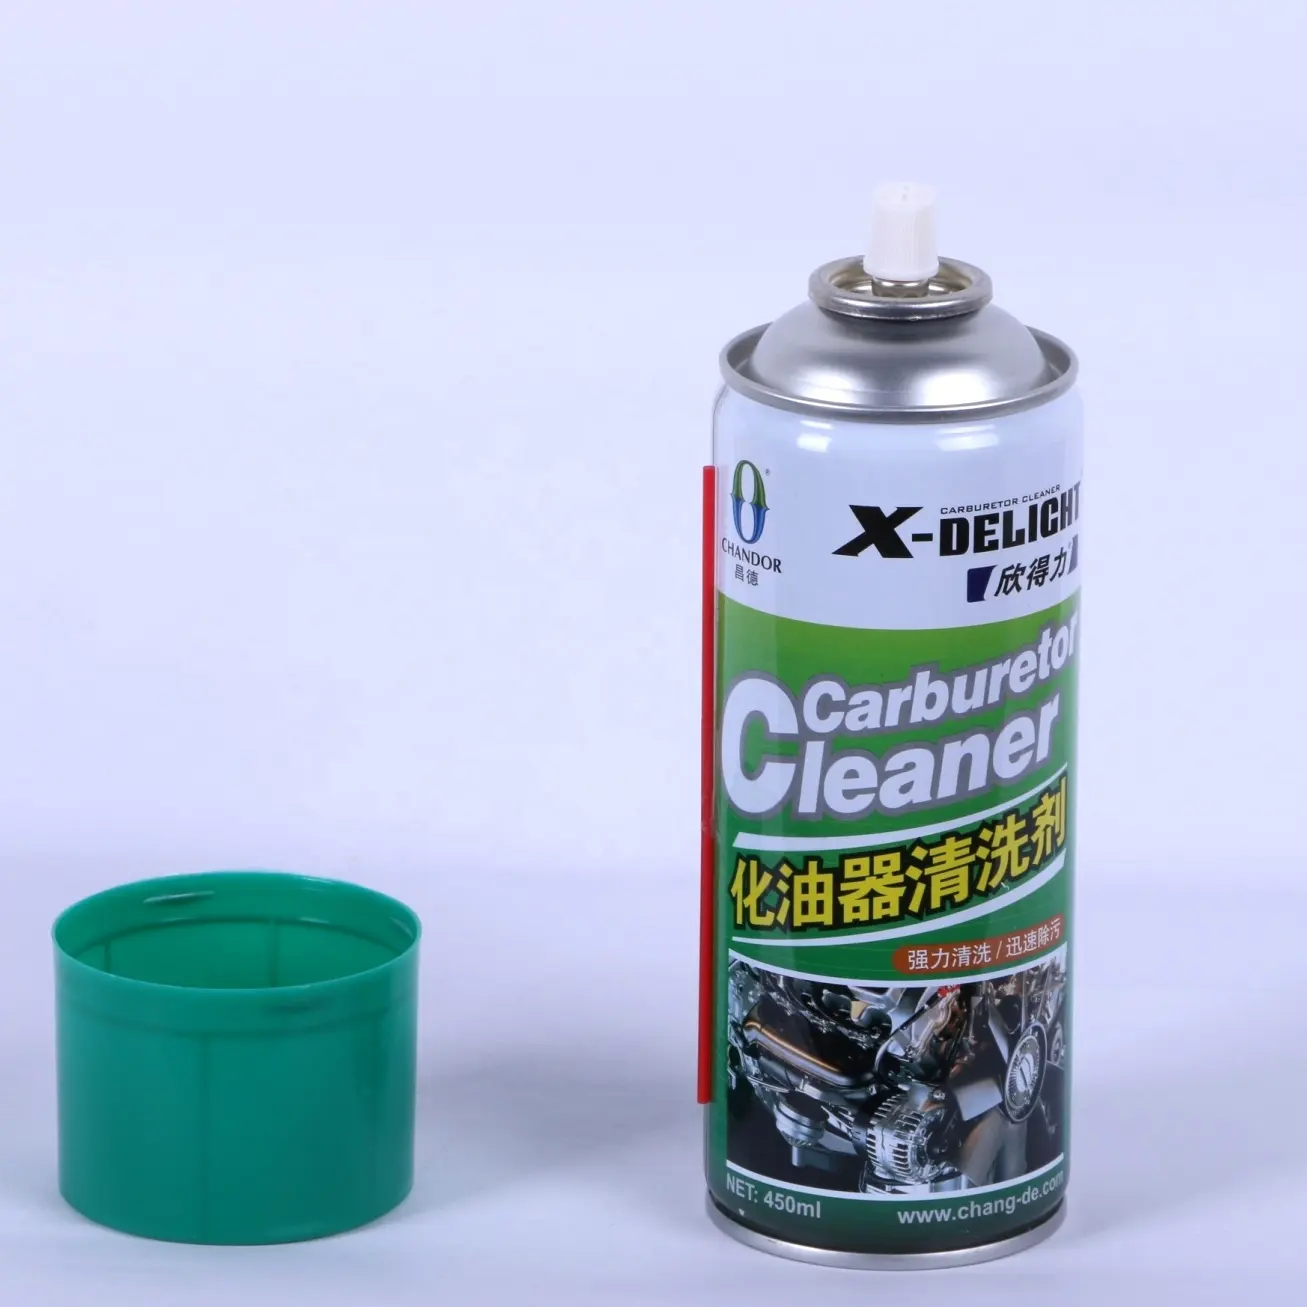 Carburetor Cleaner Spray 450ml easy remove stain oil dust cleaning motorcycle engine auto metal components spray adhesive